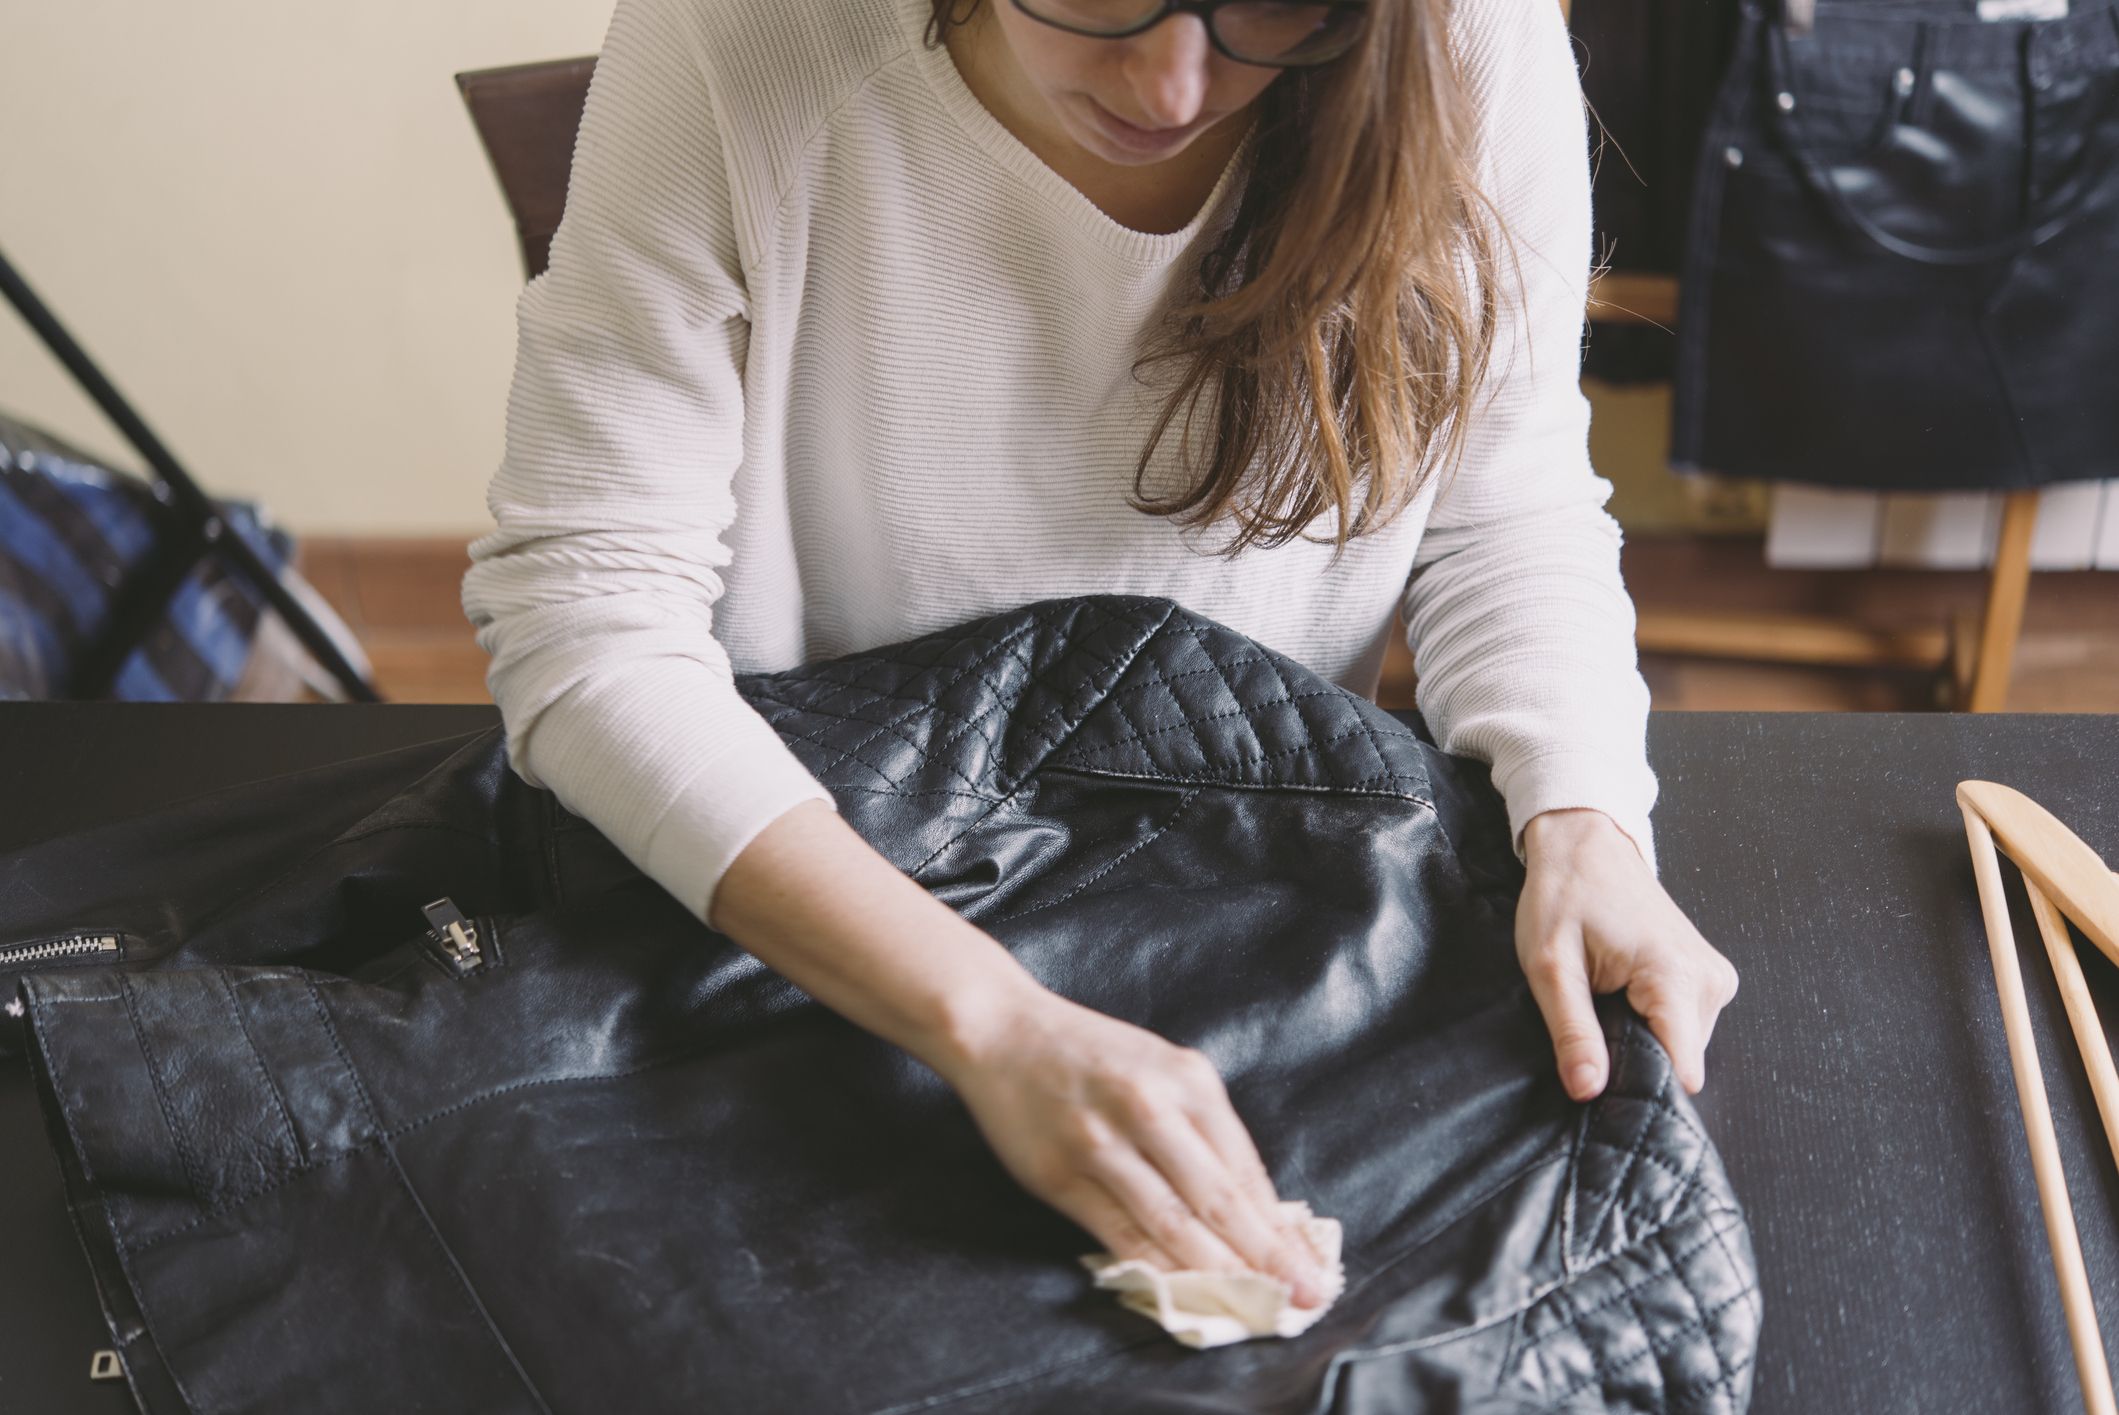 How to Clean a Leather Jacket - Best Tips for Cleaning Leather